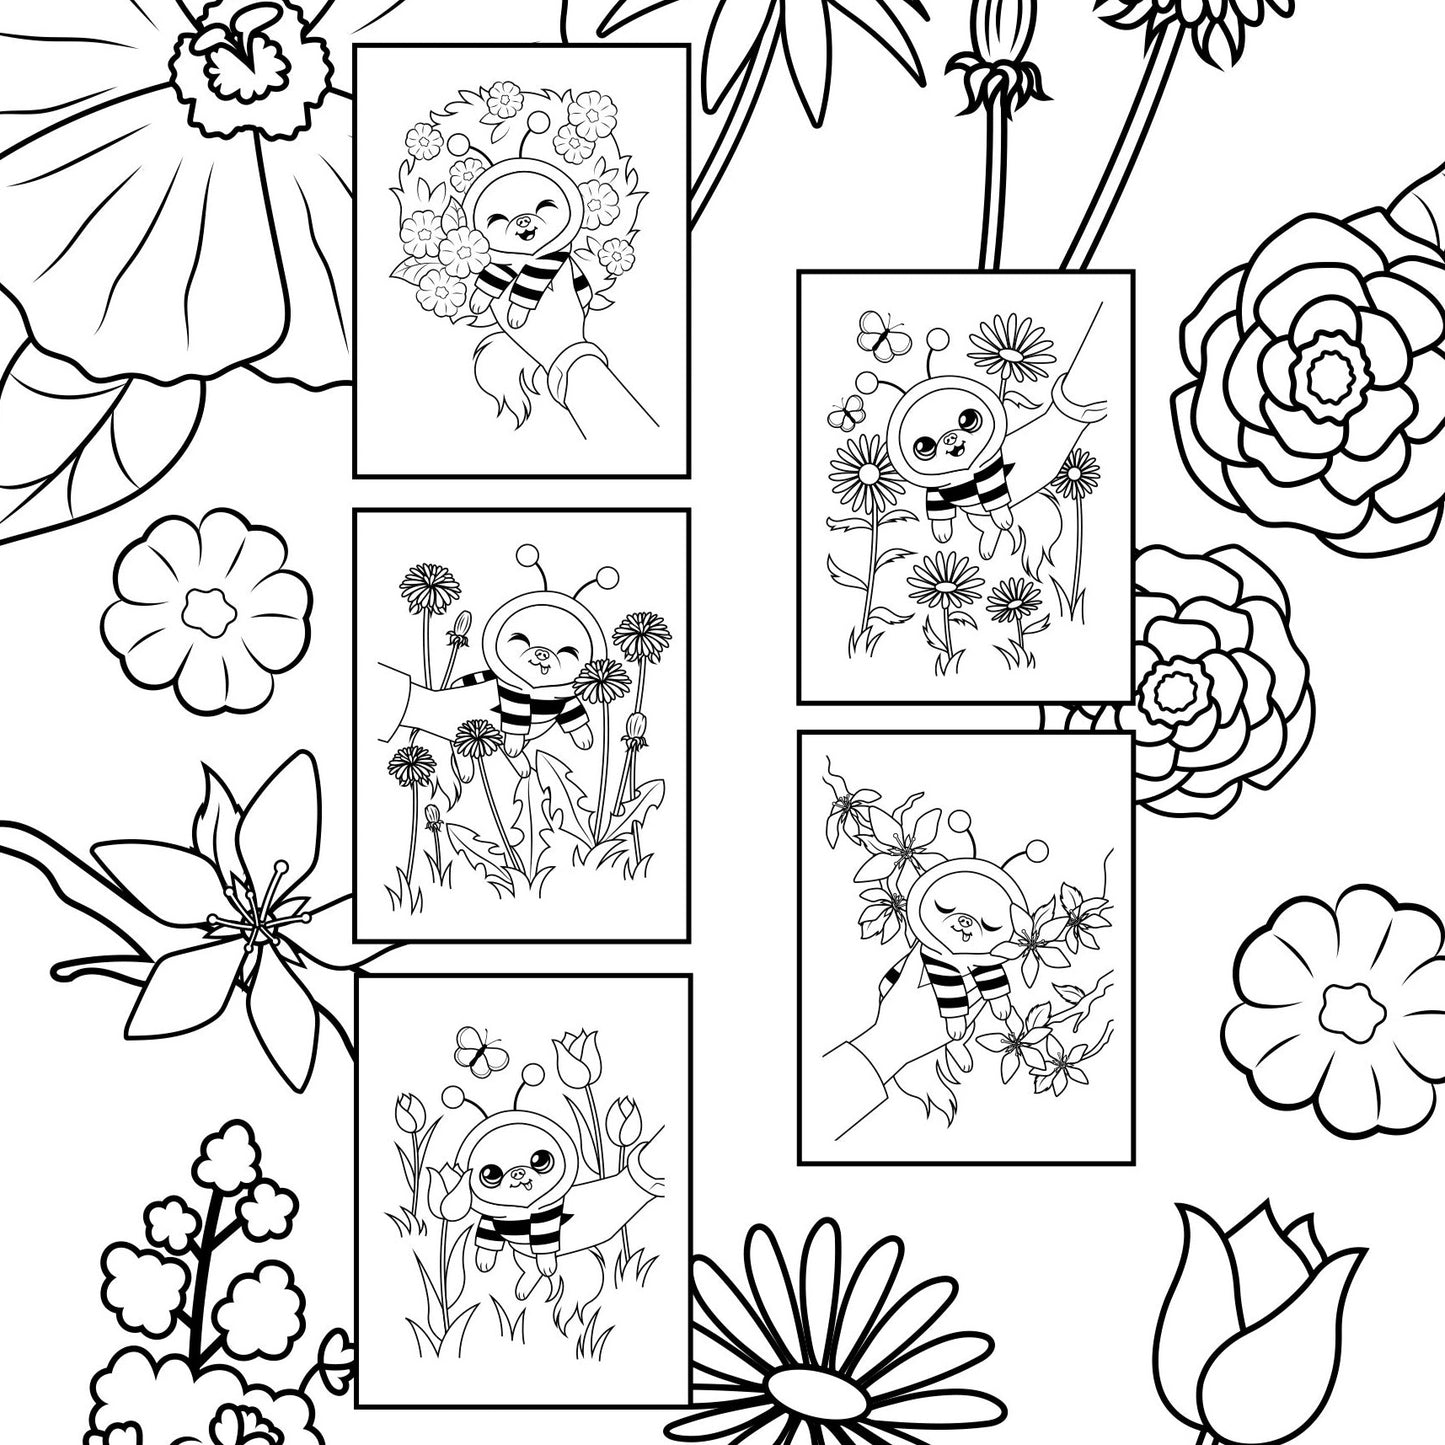 Cedric's Flower Ratings Colouring Book